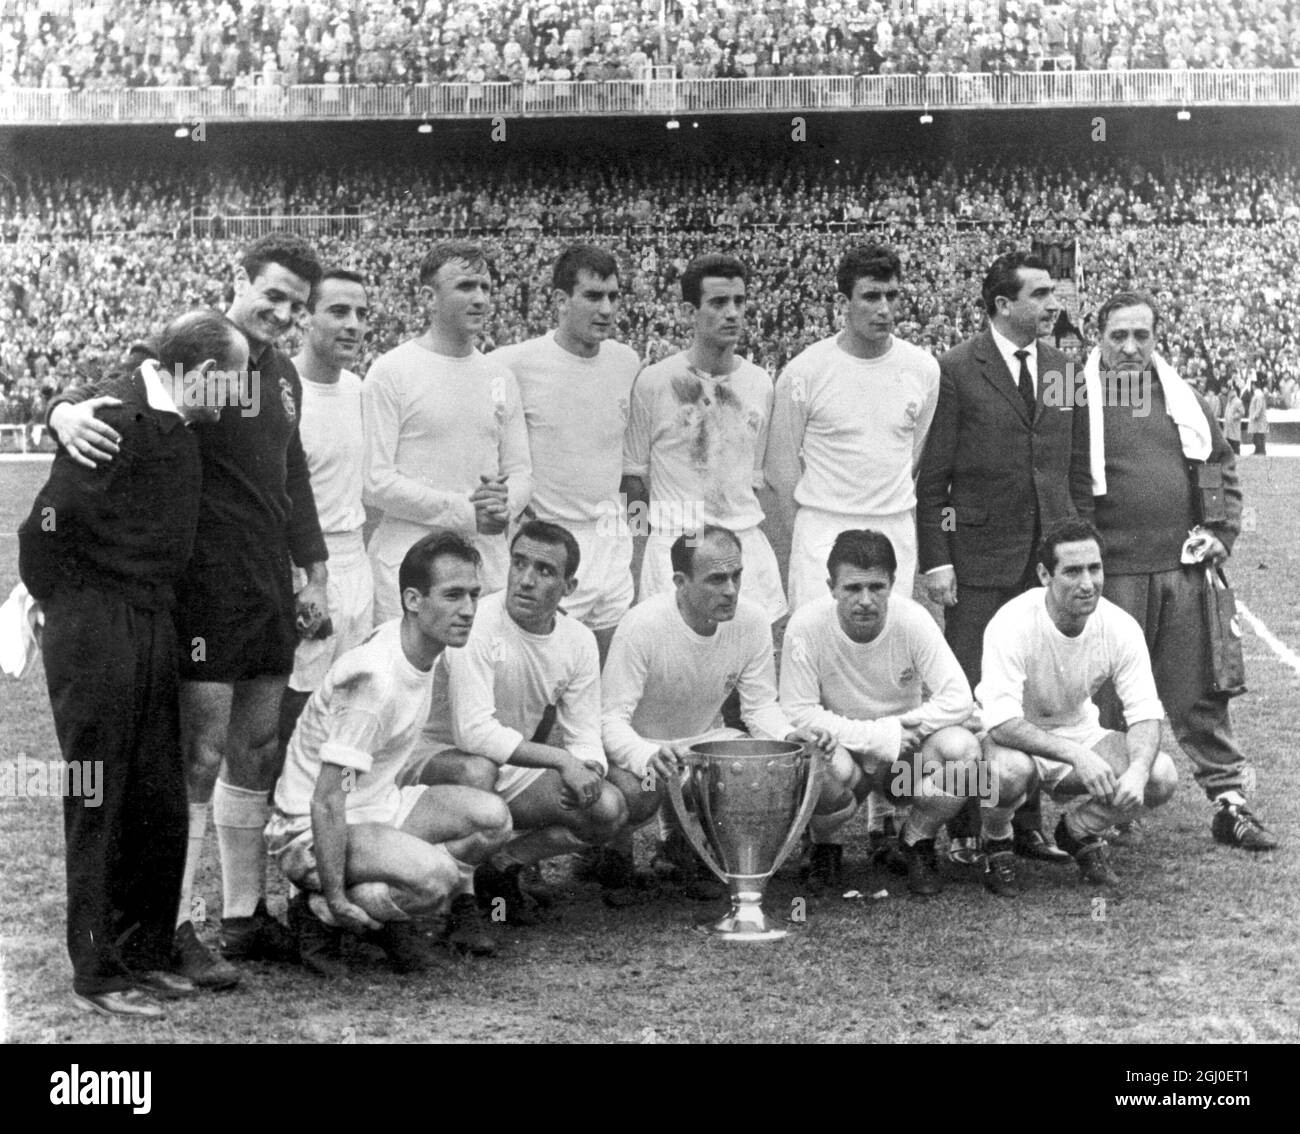 The Real Madrid team with the Spanish League Championship Trophy for 1961-62. Standing left to right: Sanz (Masseur), Araquistain (goalkeeper), Casado, Santamaria, Miera, Isidro, Pachin, Miguel Munoz (trainer) and Legido (Masseur). Kneeling on ground from left to right are: Tejada, Luis Del Sol, Alfredo Di Stefano, Ferenc Puskas and Gento (captain). 5th April 1962. Stock Photo